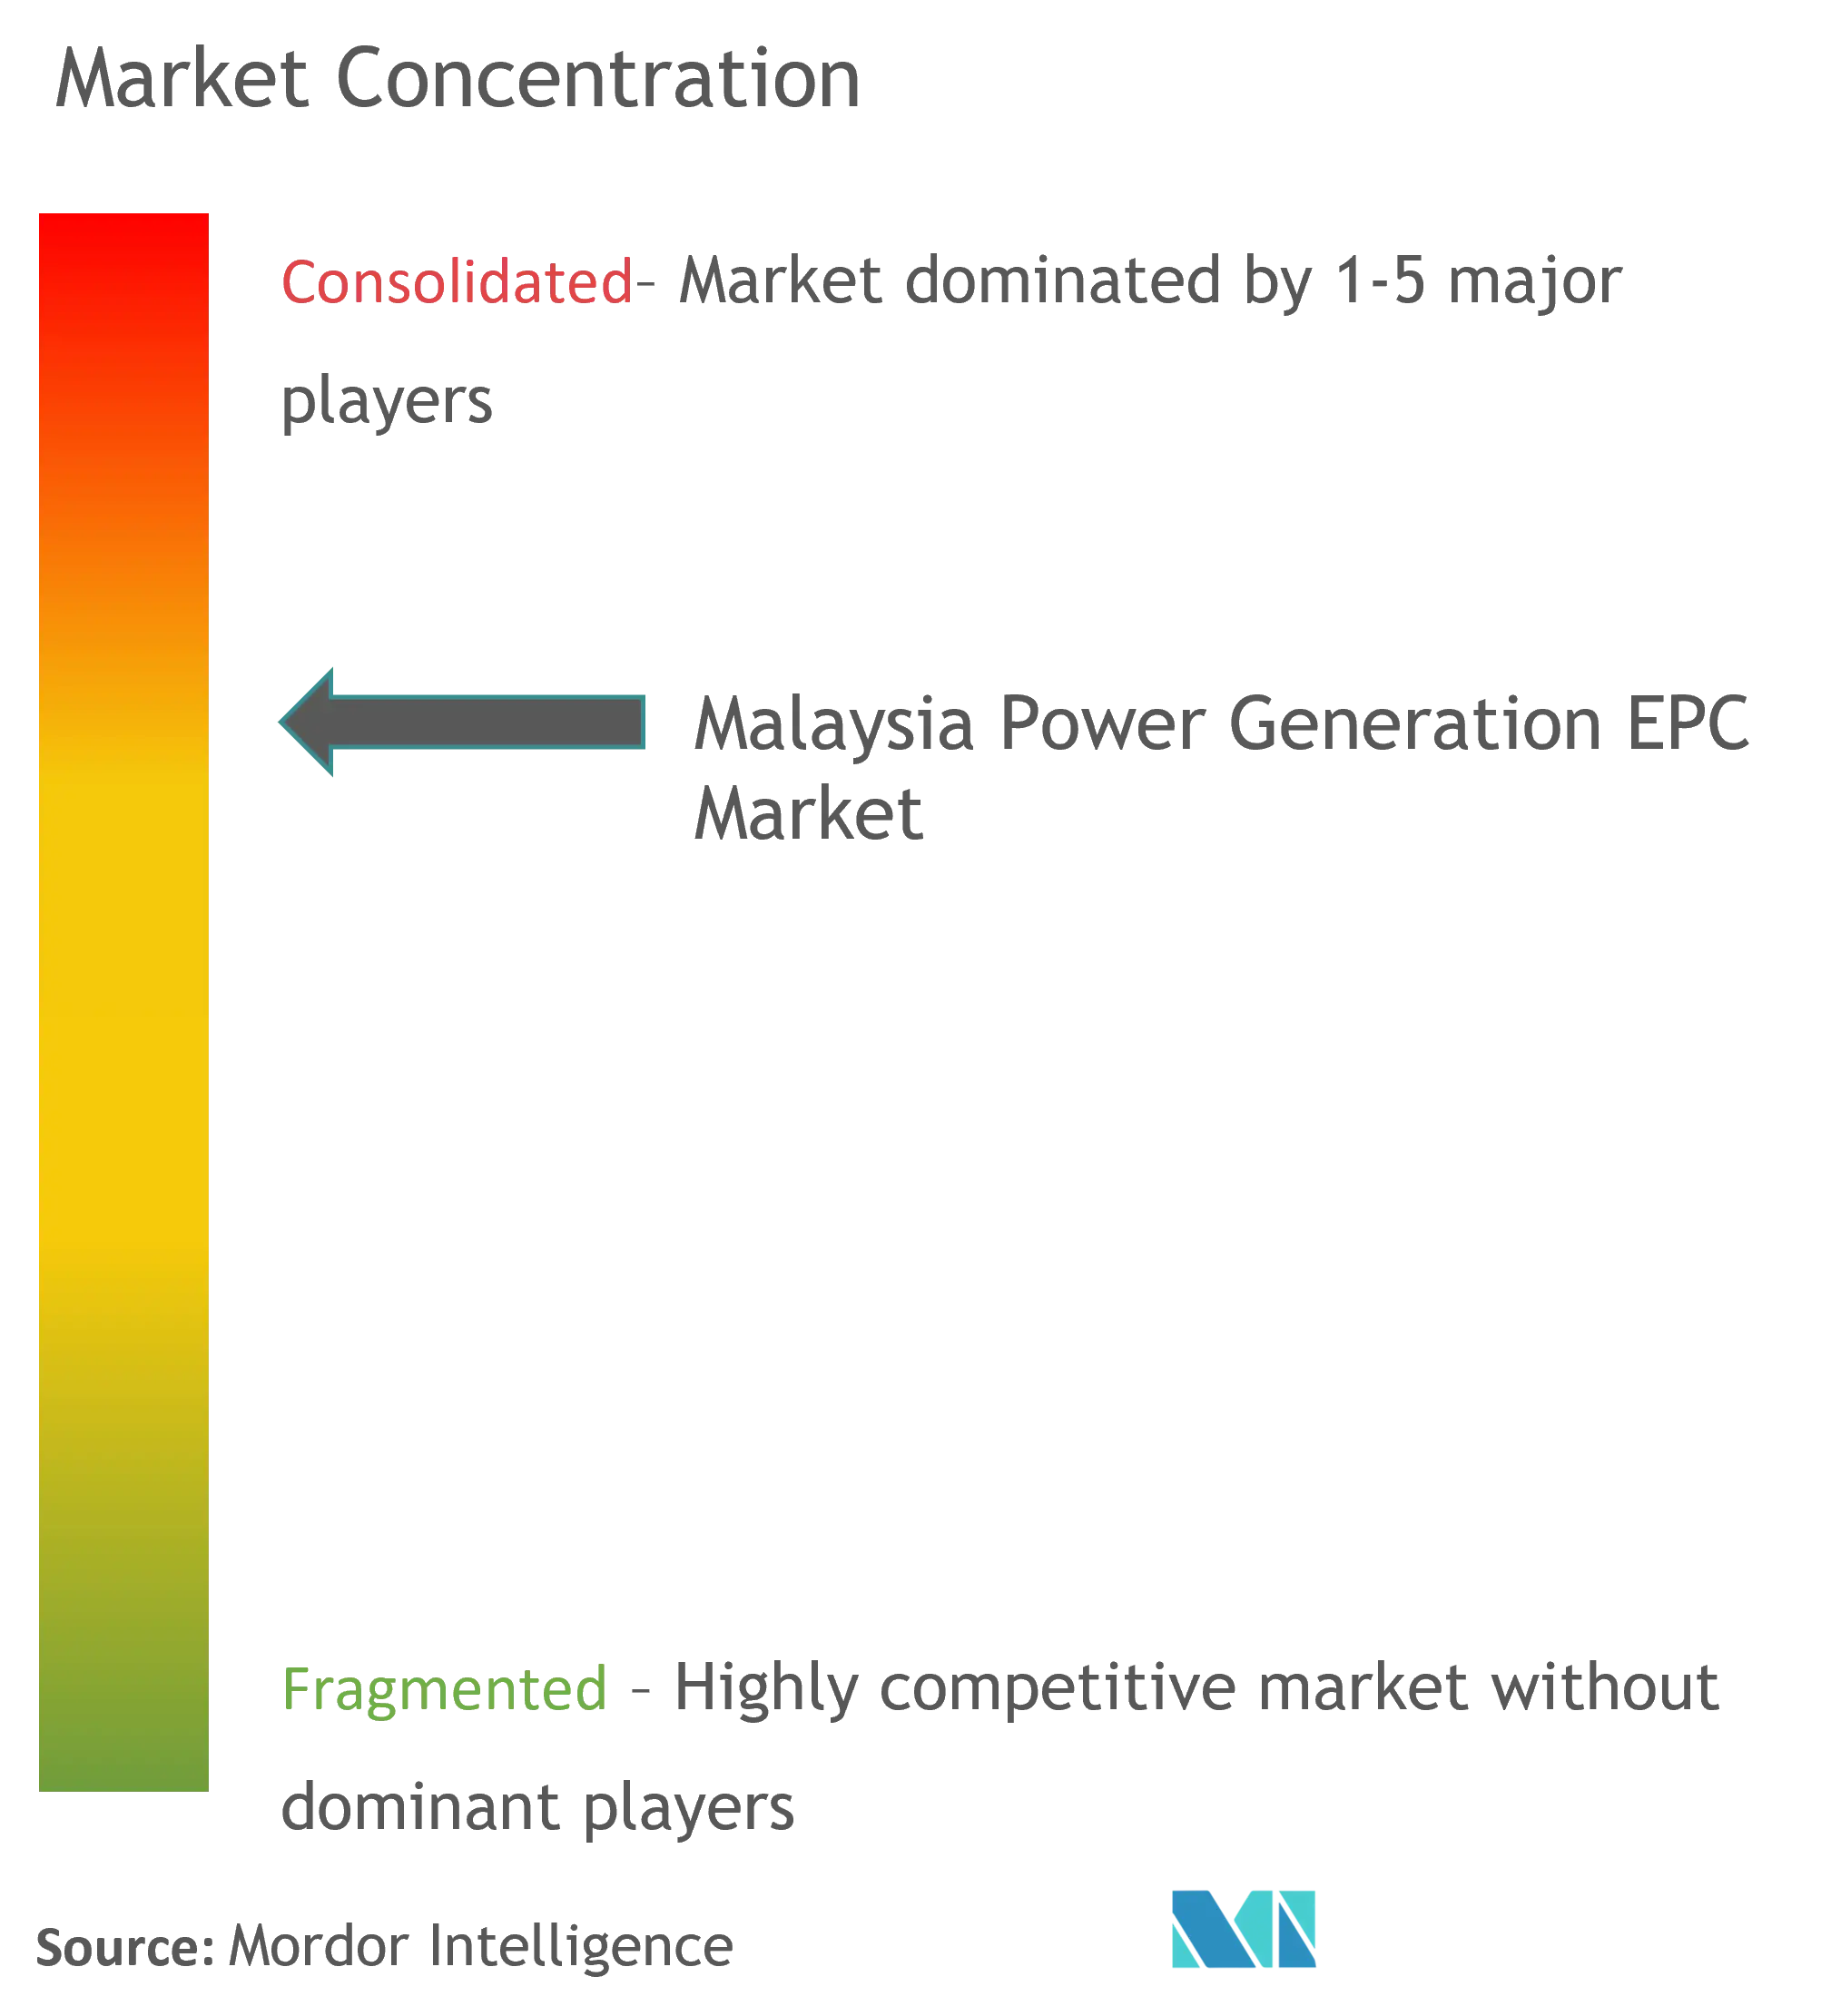 Market Concentration-Malaysia POwer GEneration EPC Market.png